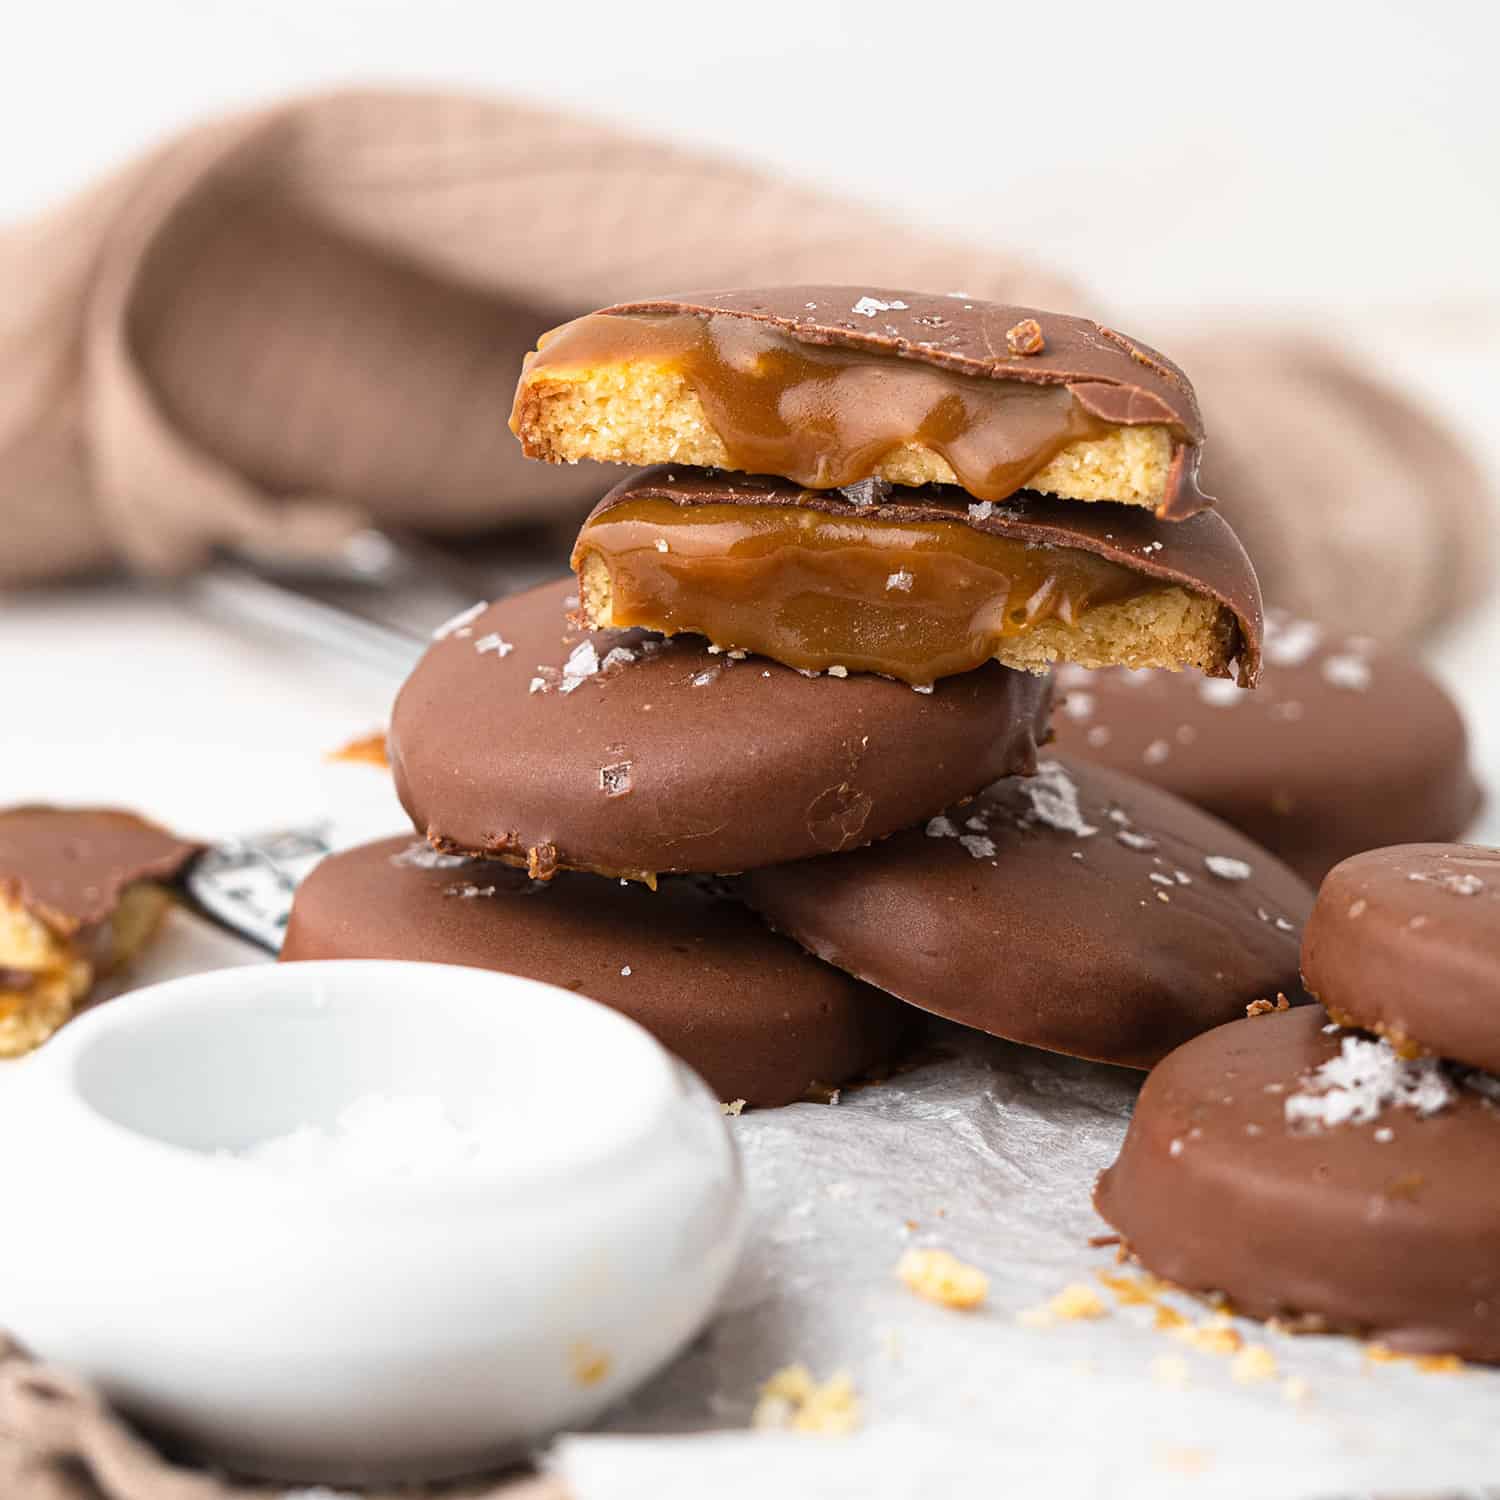 shortbread cookies topped with caramel and coated in chocolate